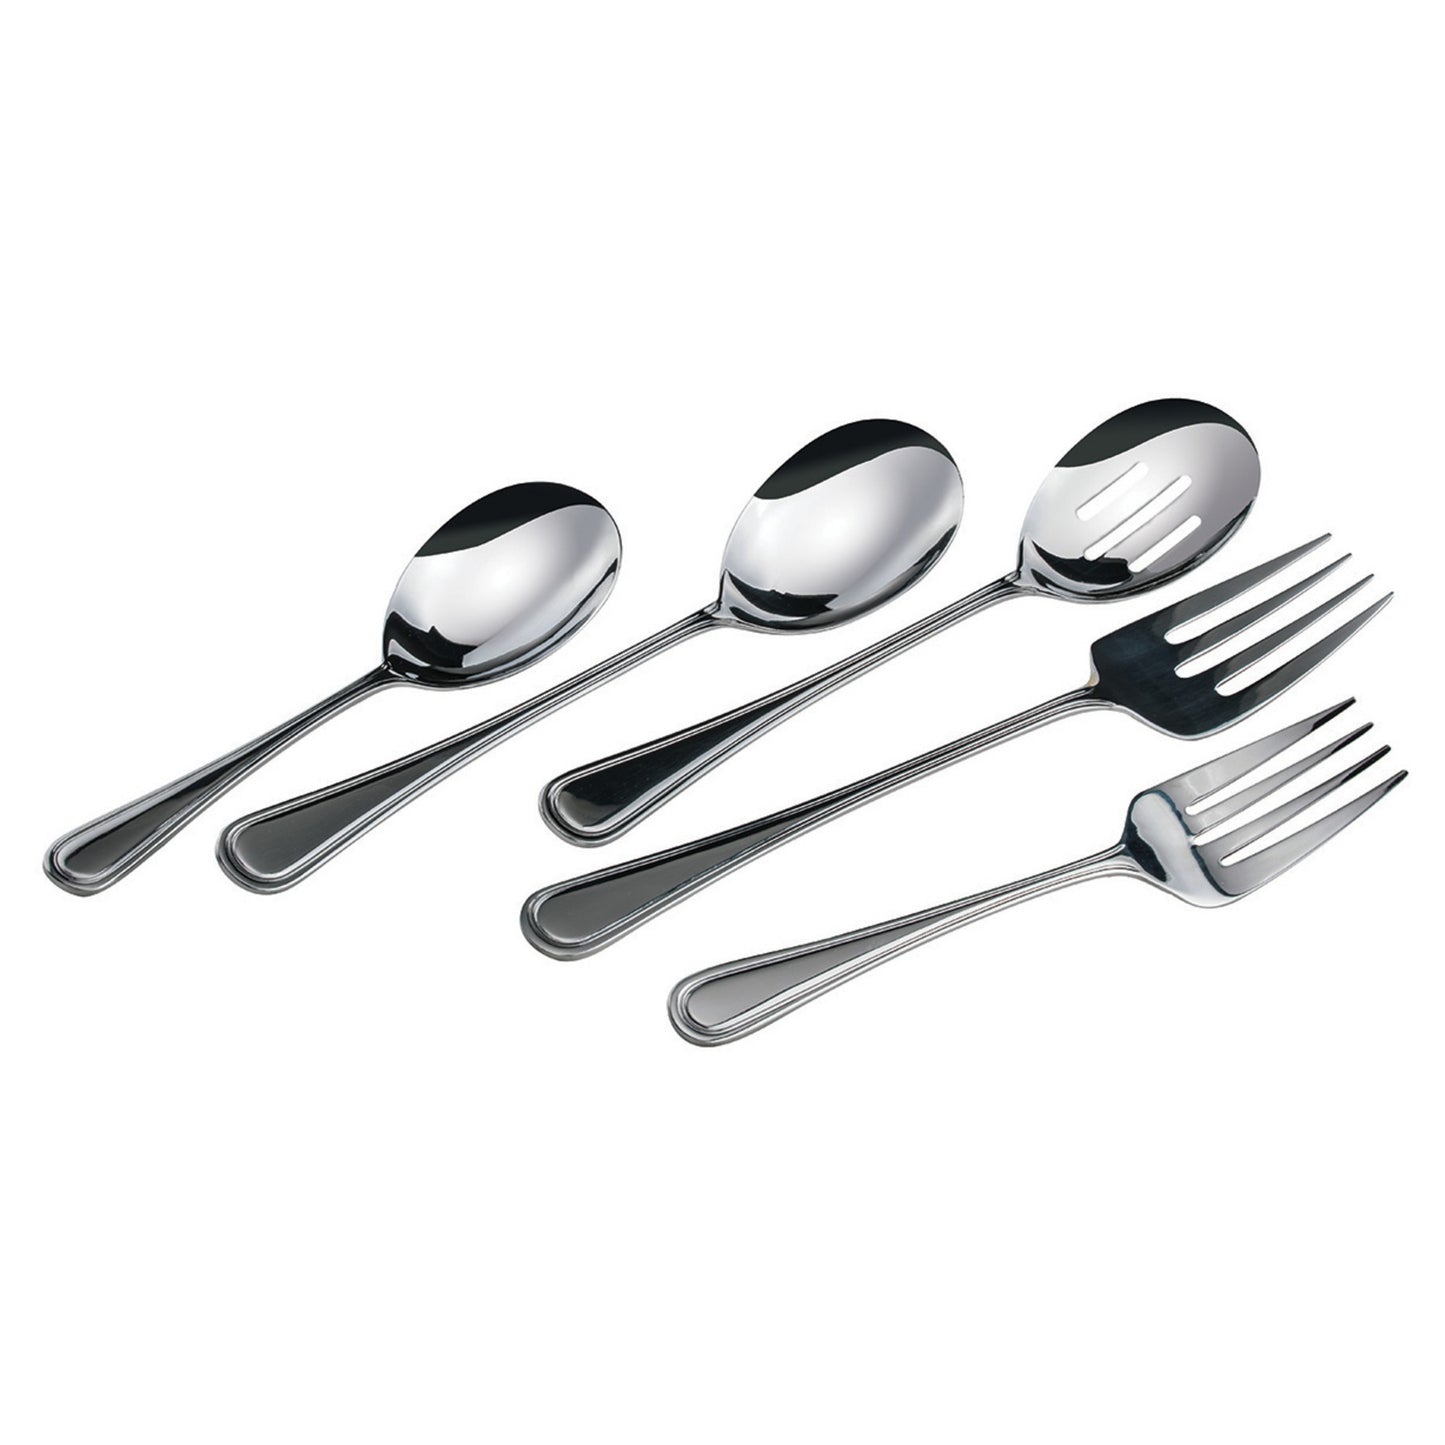 0030-23 - Shangarila Solid Serving Spoon, 18/8 Extra Heavyweight